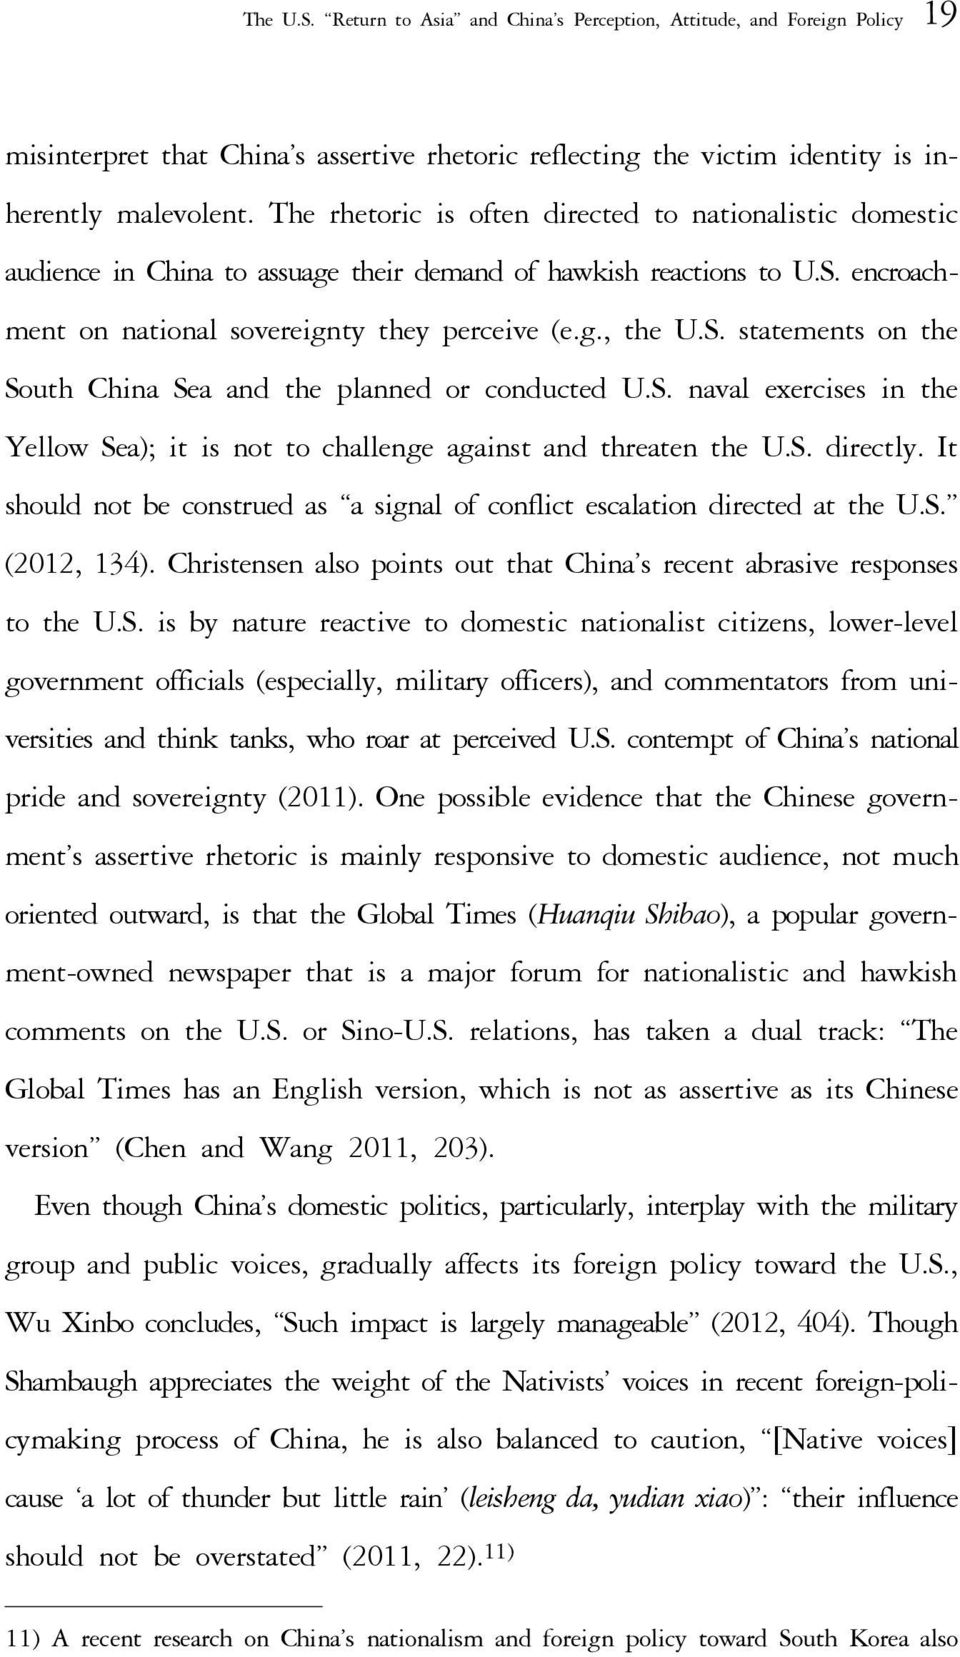 S. naval exercises in the Yellow Sea); it is not to challenge against and threaten the U.S. directly. It should not be construed as a signal of conflict escalation directed at the U.S. (2012, 134).